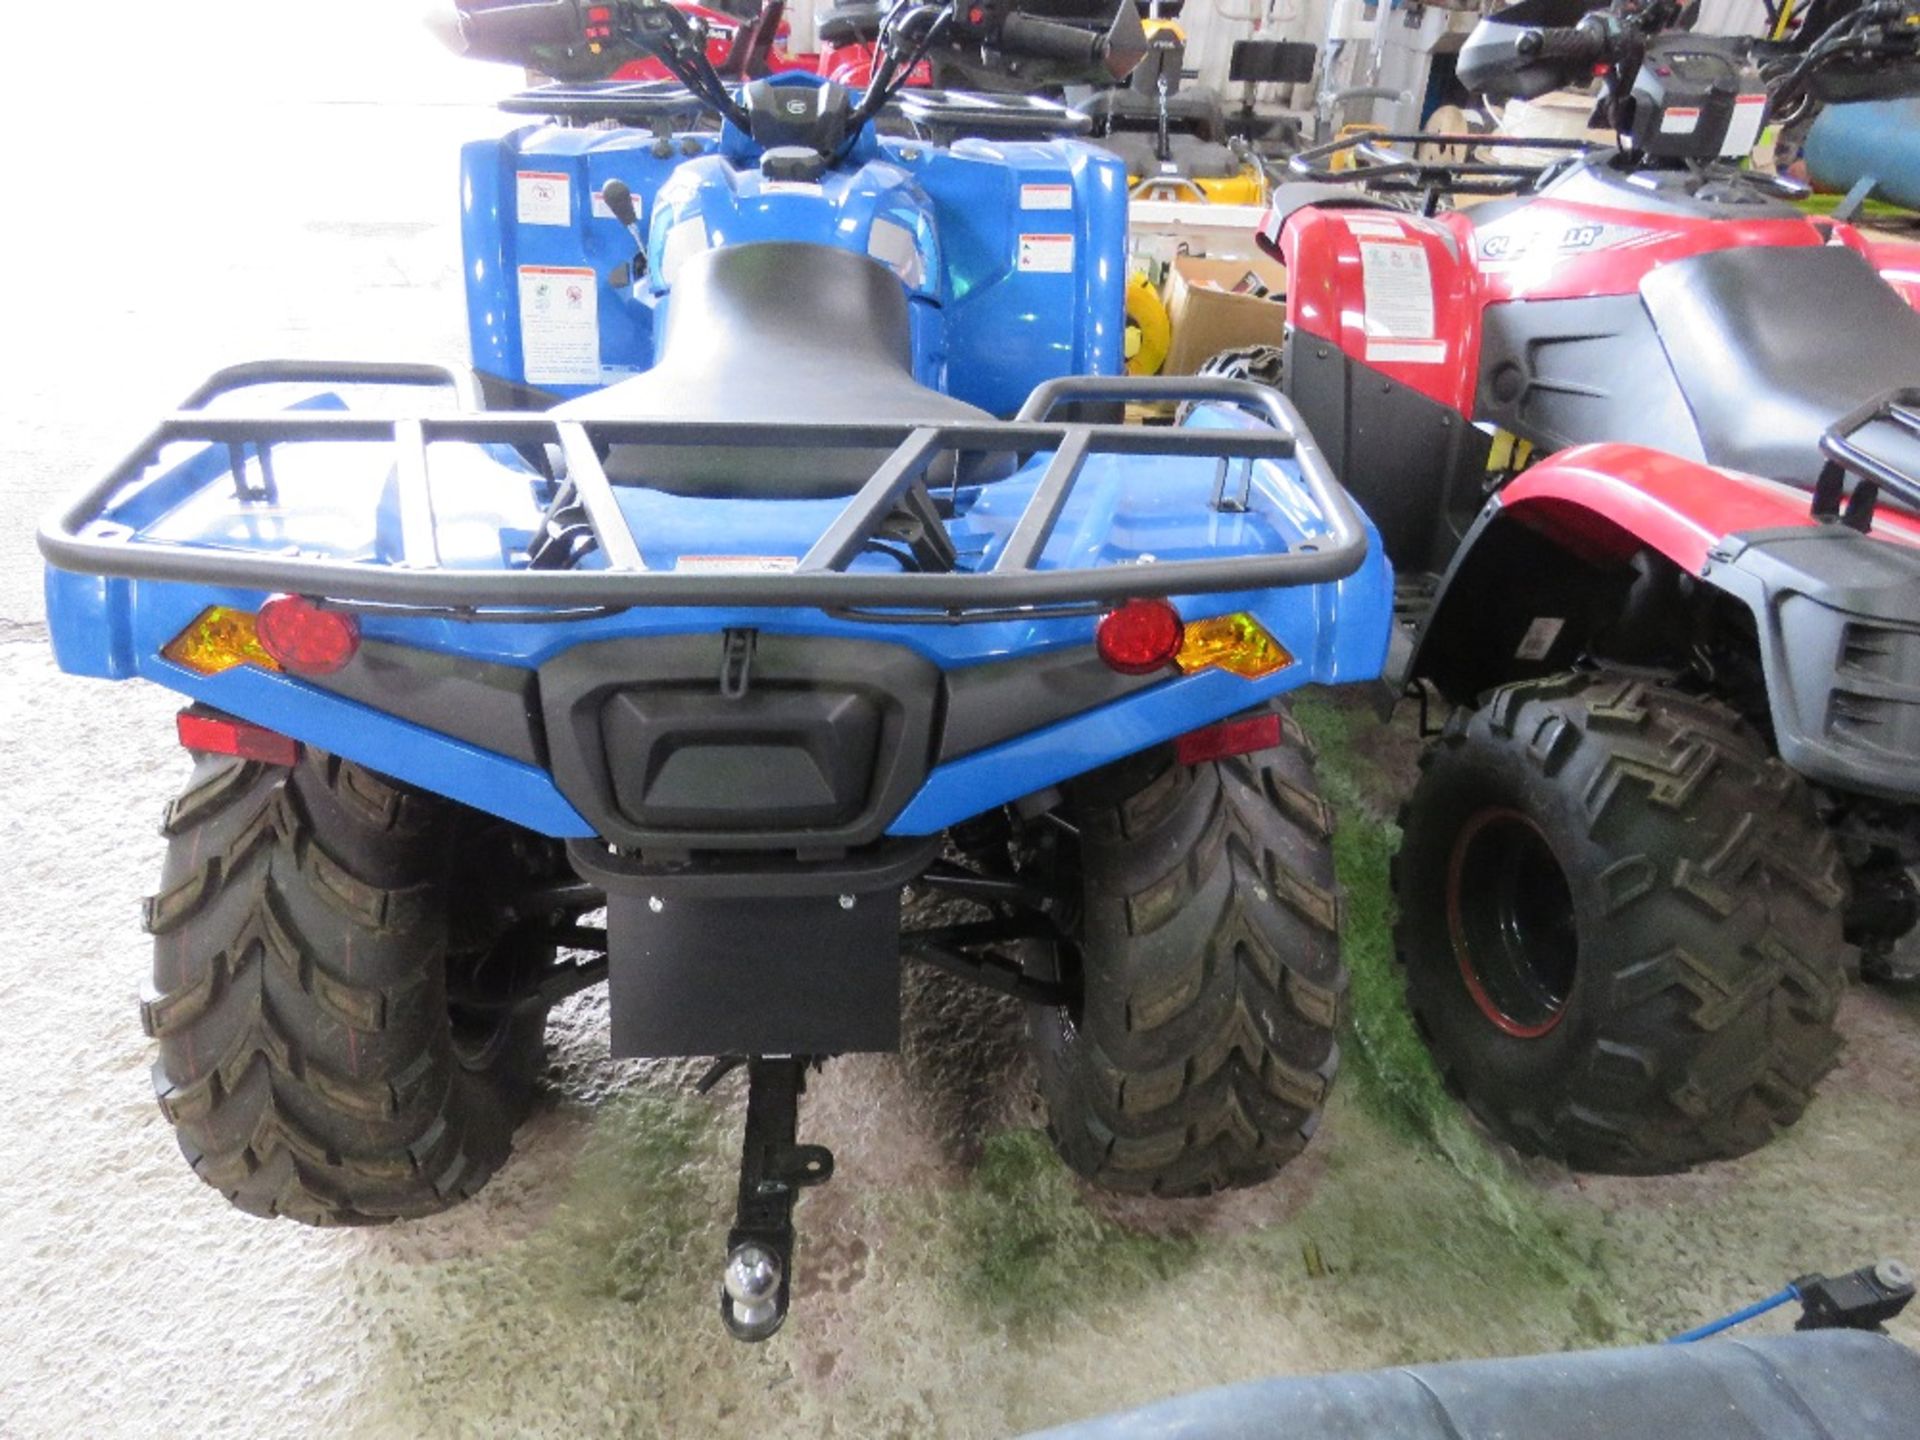 CFMOTO/QUADZILLA 450 4WD QUAD BIKE 4WD WITH WINCH. 7.8 REC MILES. WHEN TESTED WAS SEEN TO DRIVE, STE - Image 8 of 8